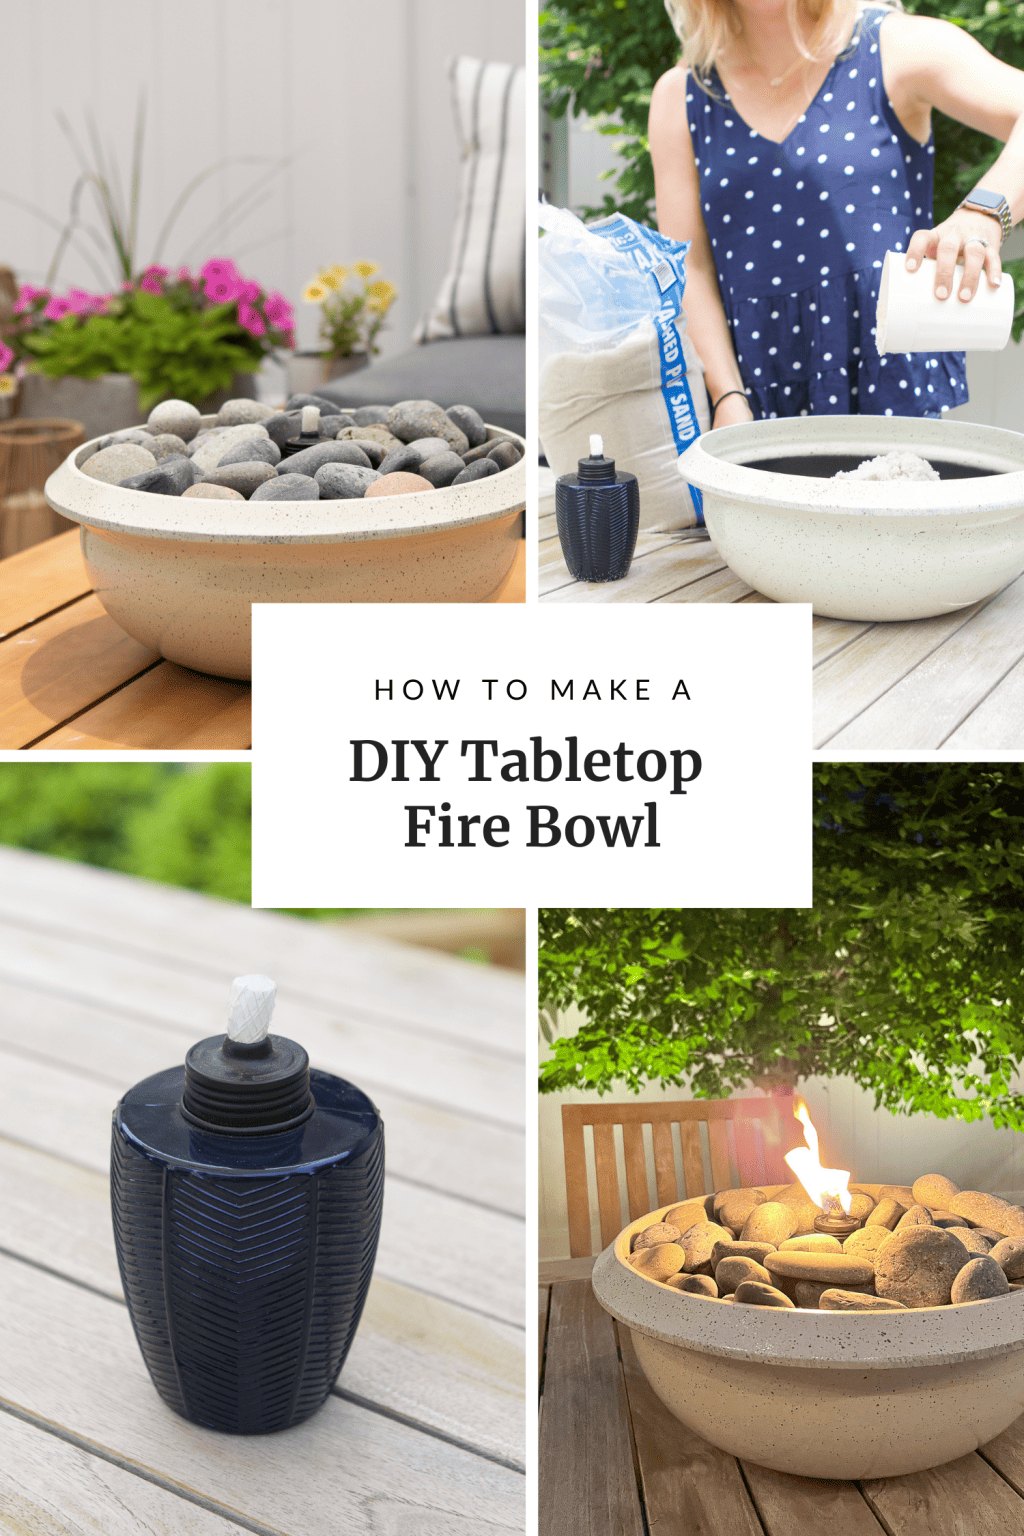 How to make a DIY tabletop fire bowl